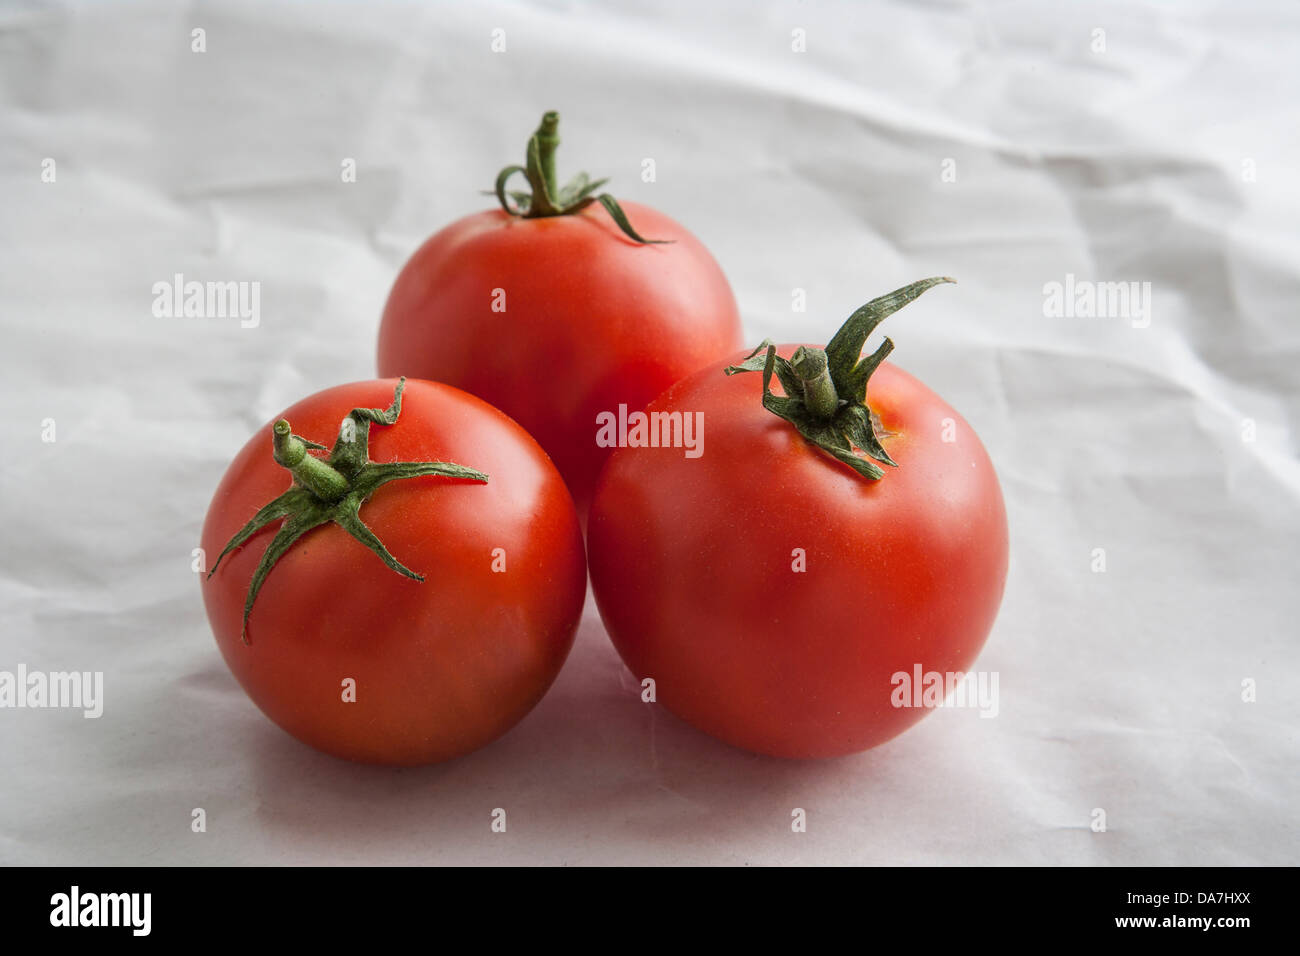 red ripe tomatoes on butcher paper Stock Photo